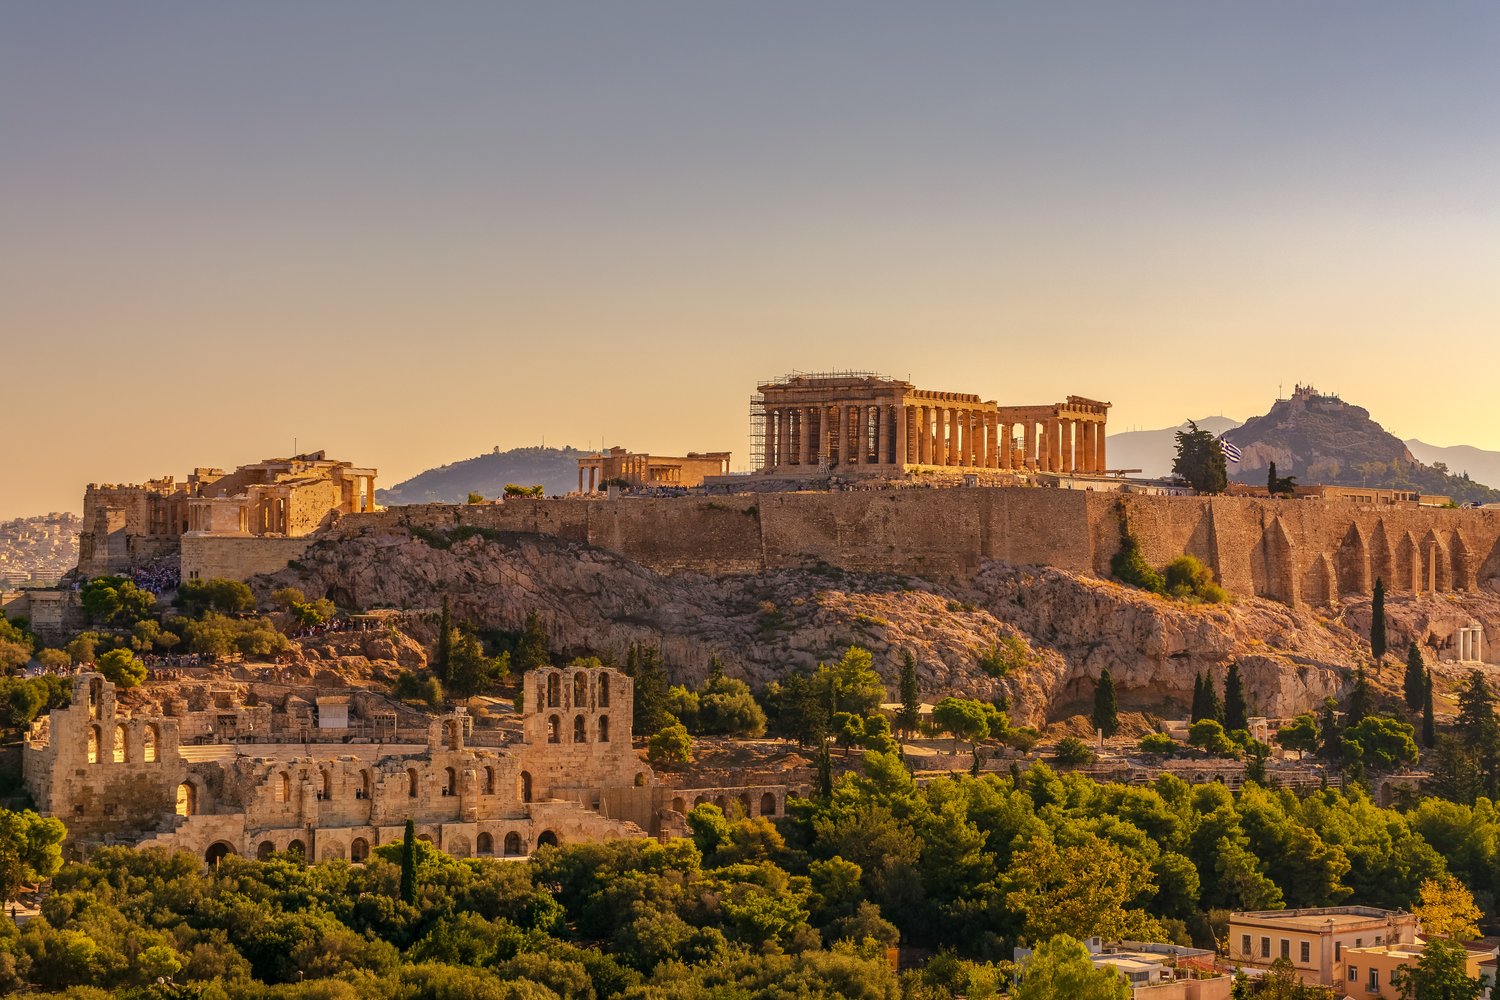 View of Acropolis of Athens with Parthenon and Erechtheion from Filopappou Hill.